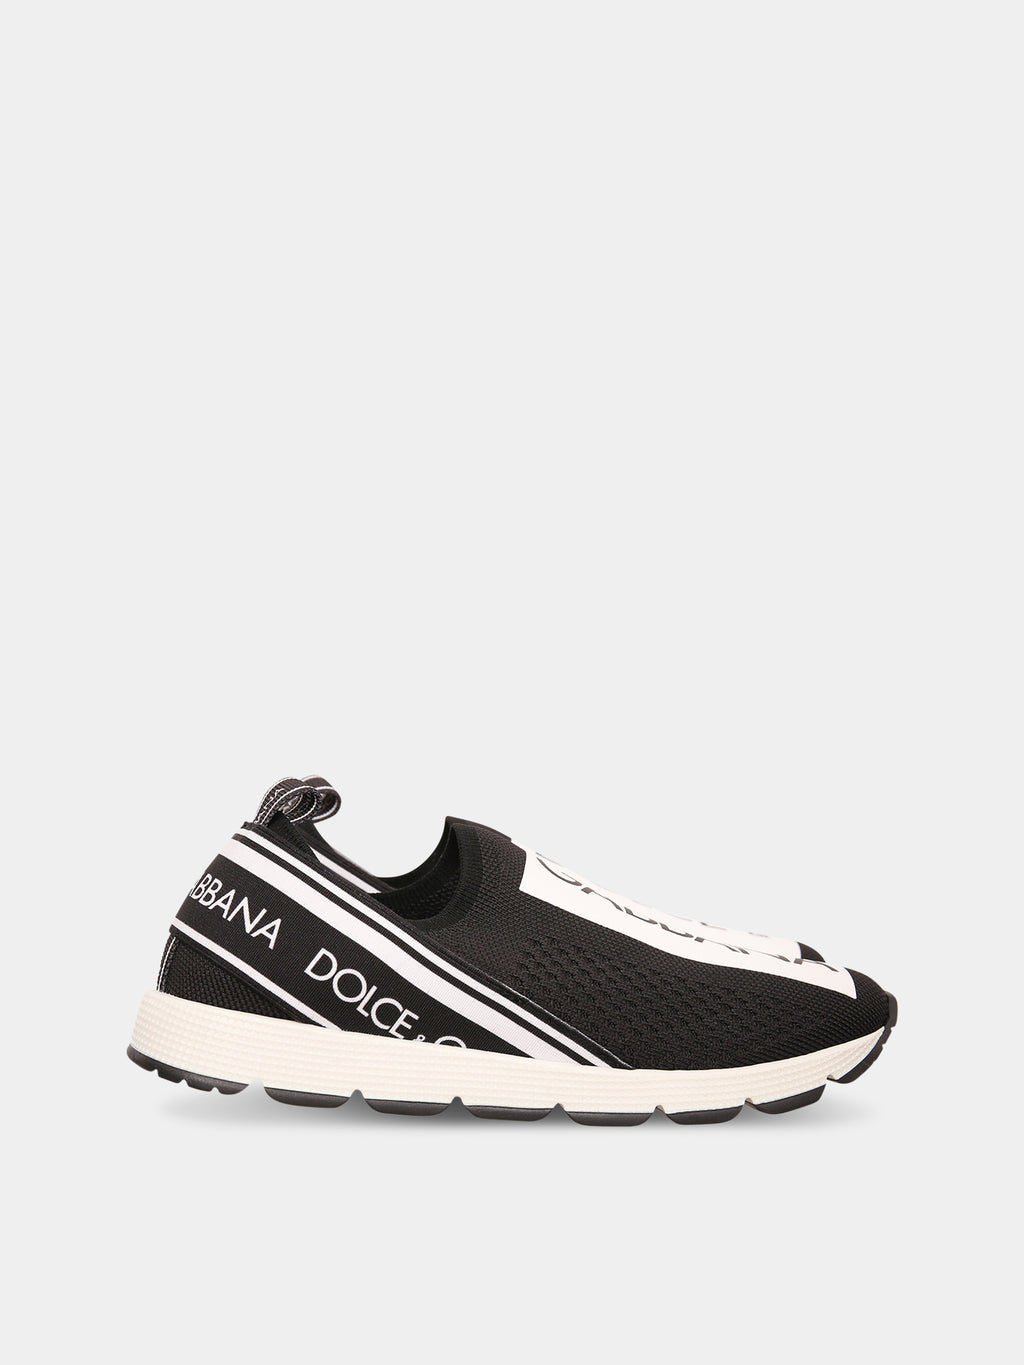 Black sneaker with white and black logo